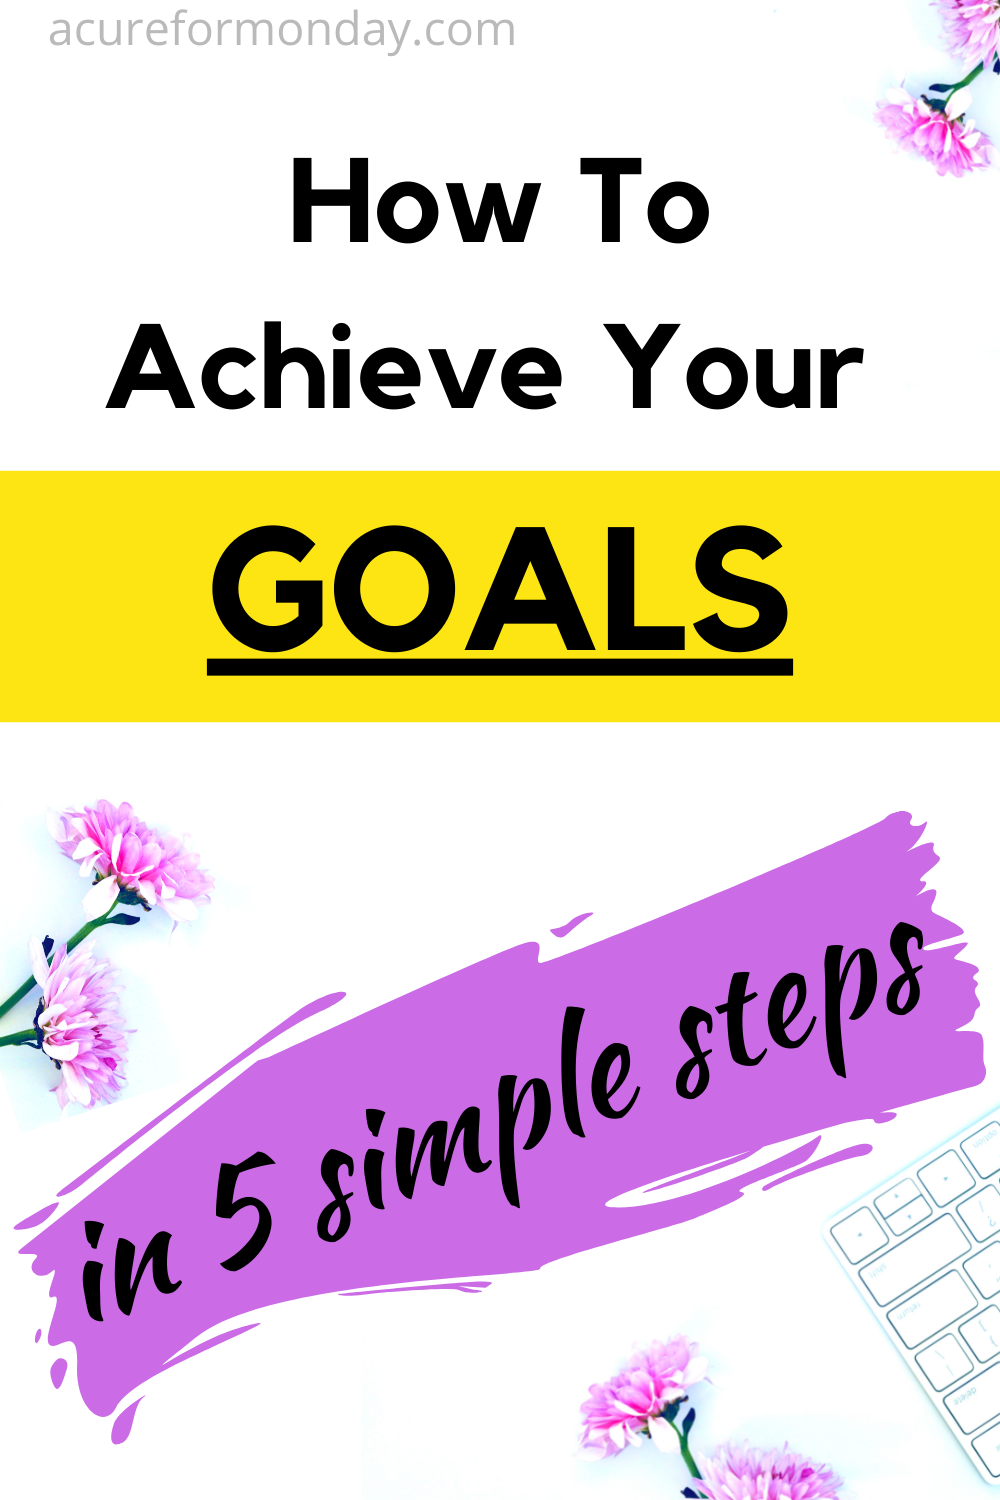 How To Achieve Your Goals In 5 Proven Steps A Cure For Monday 2661